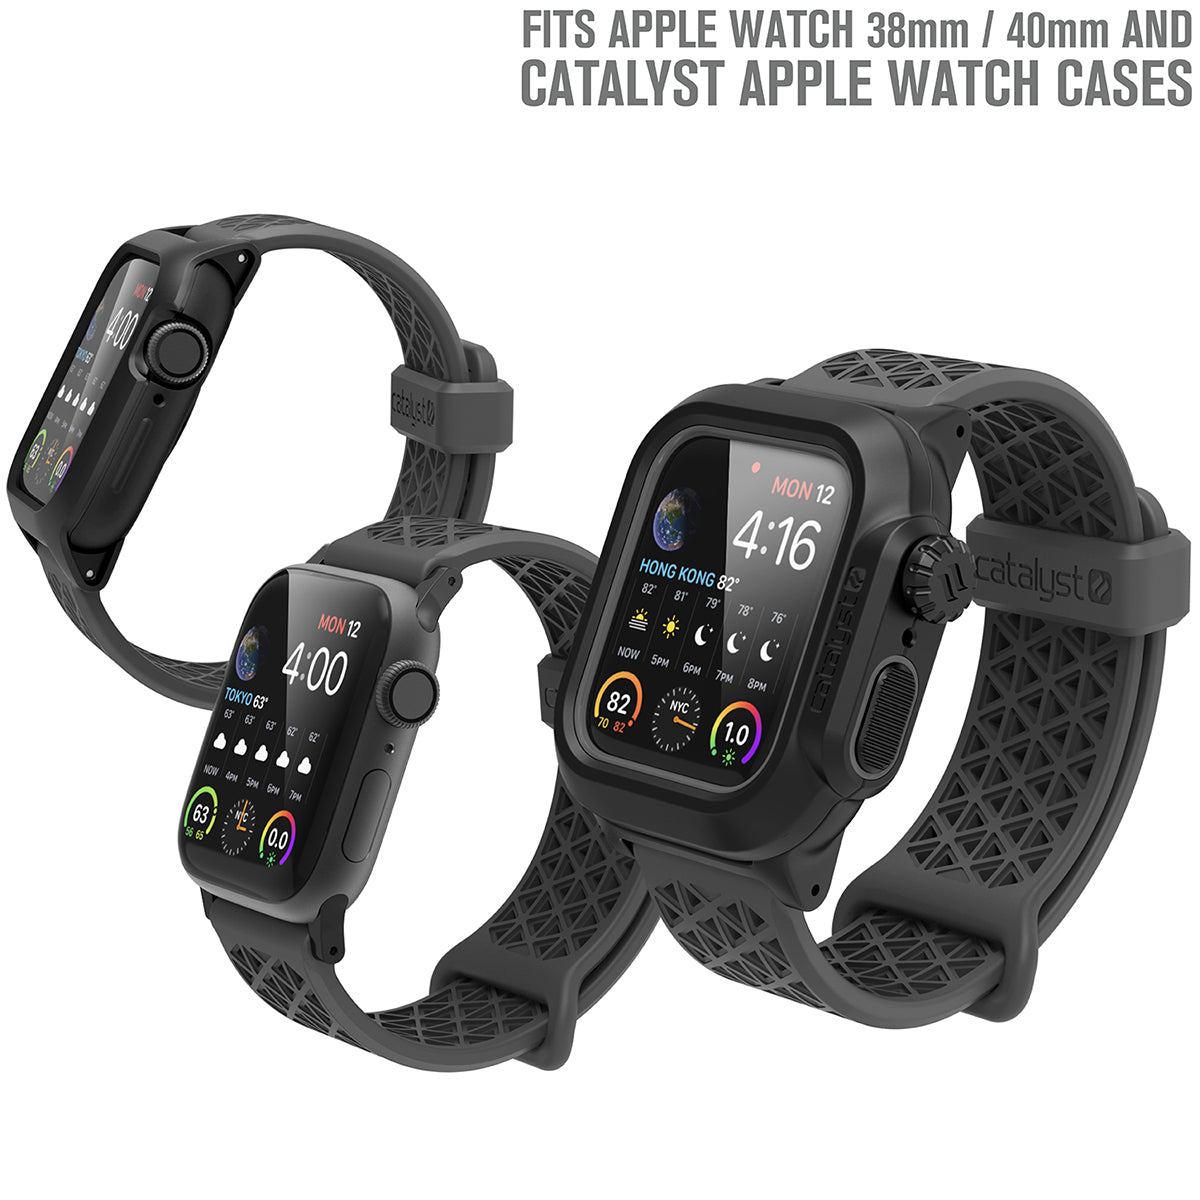 catalyst apple watch series 9 8 7 6 5 4 se gen 2 1 38 40 41mm sports band with apple connector three apple watches with impact and waterproof case with sports band space gray text reads fits apple watch 38mm 40mm and catalyst apple watch cases